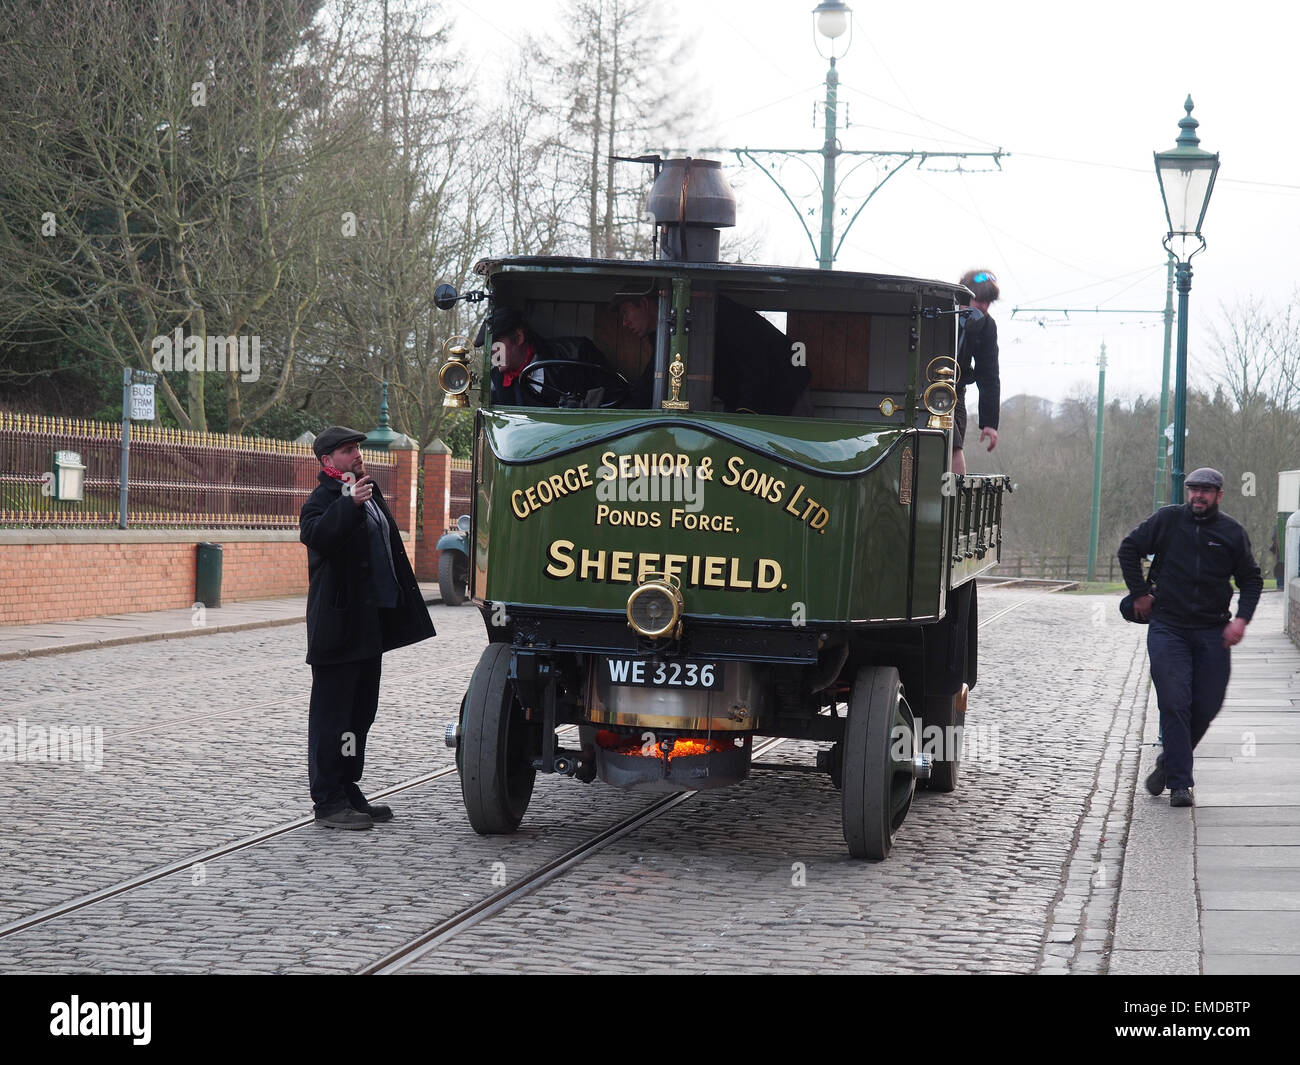 Working vintage steam-powered vehicle on display at Beamish Open Air Museum in Co. Durham, England. Stock Photo